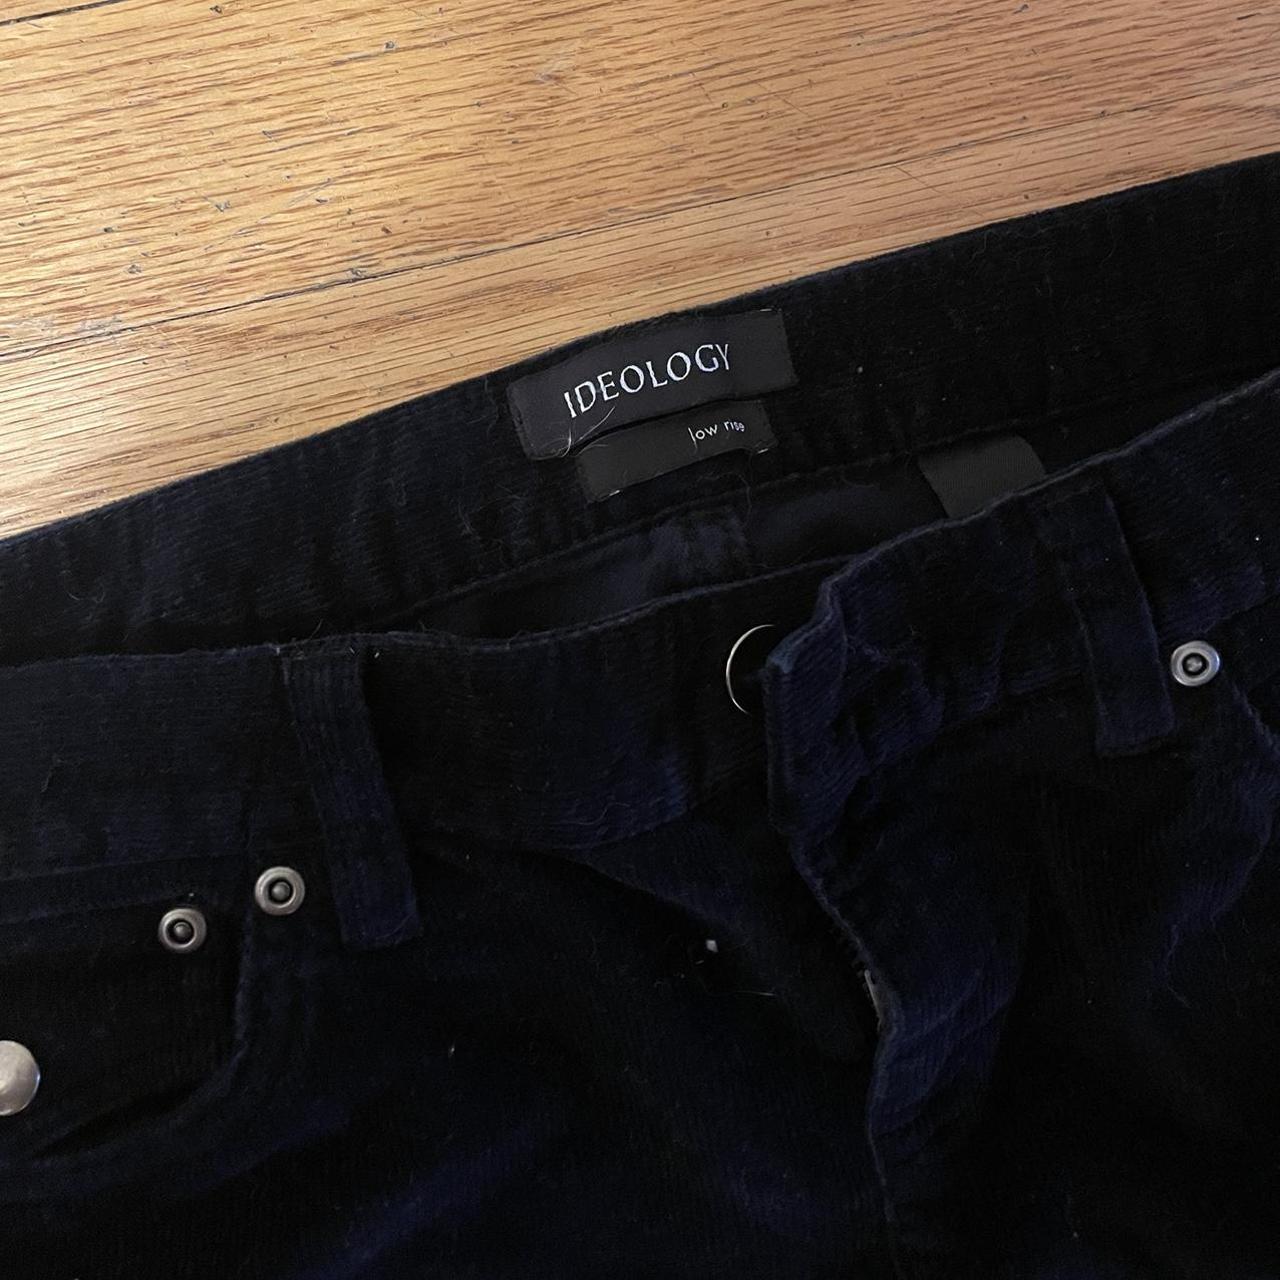 Ideology Women's Black and Navy Trousers (2)